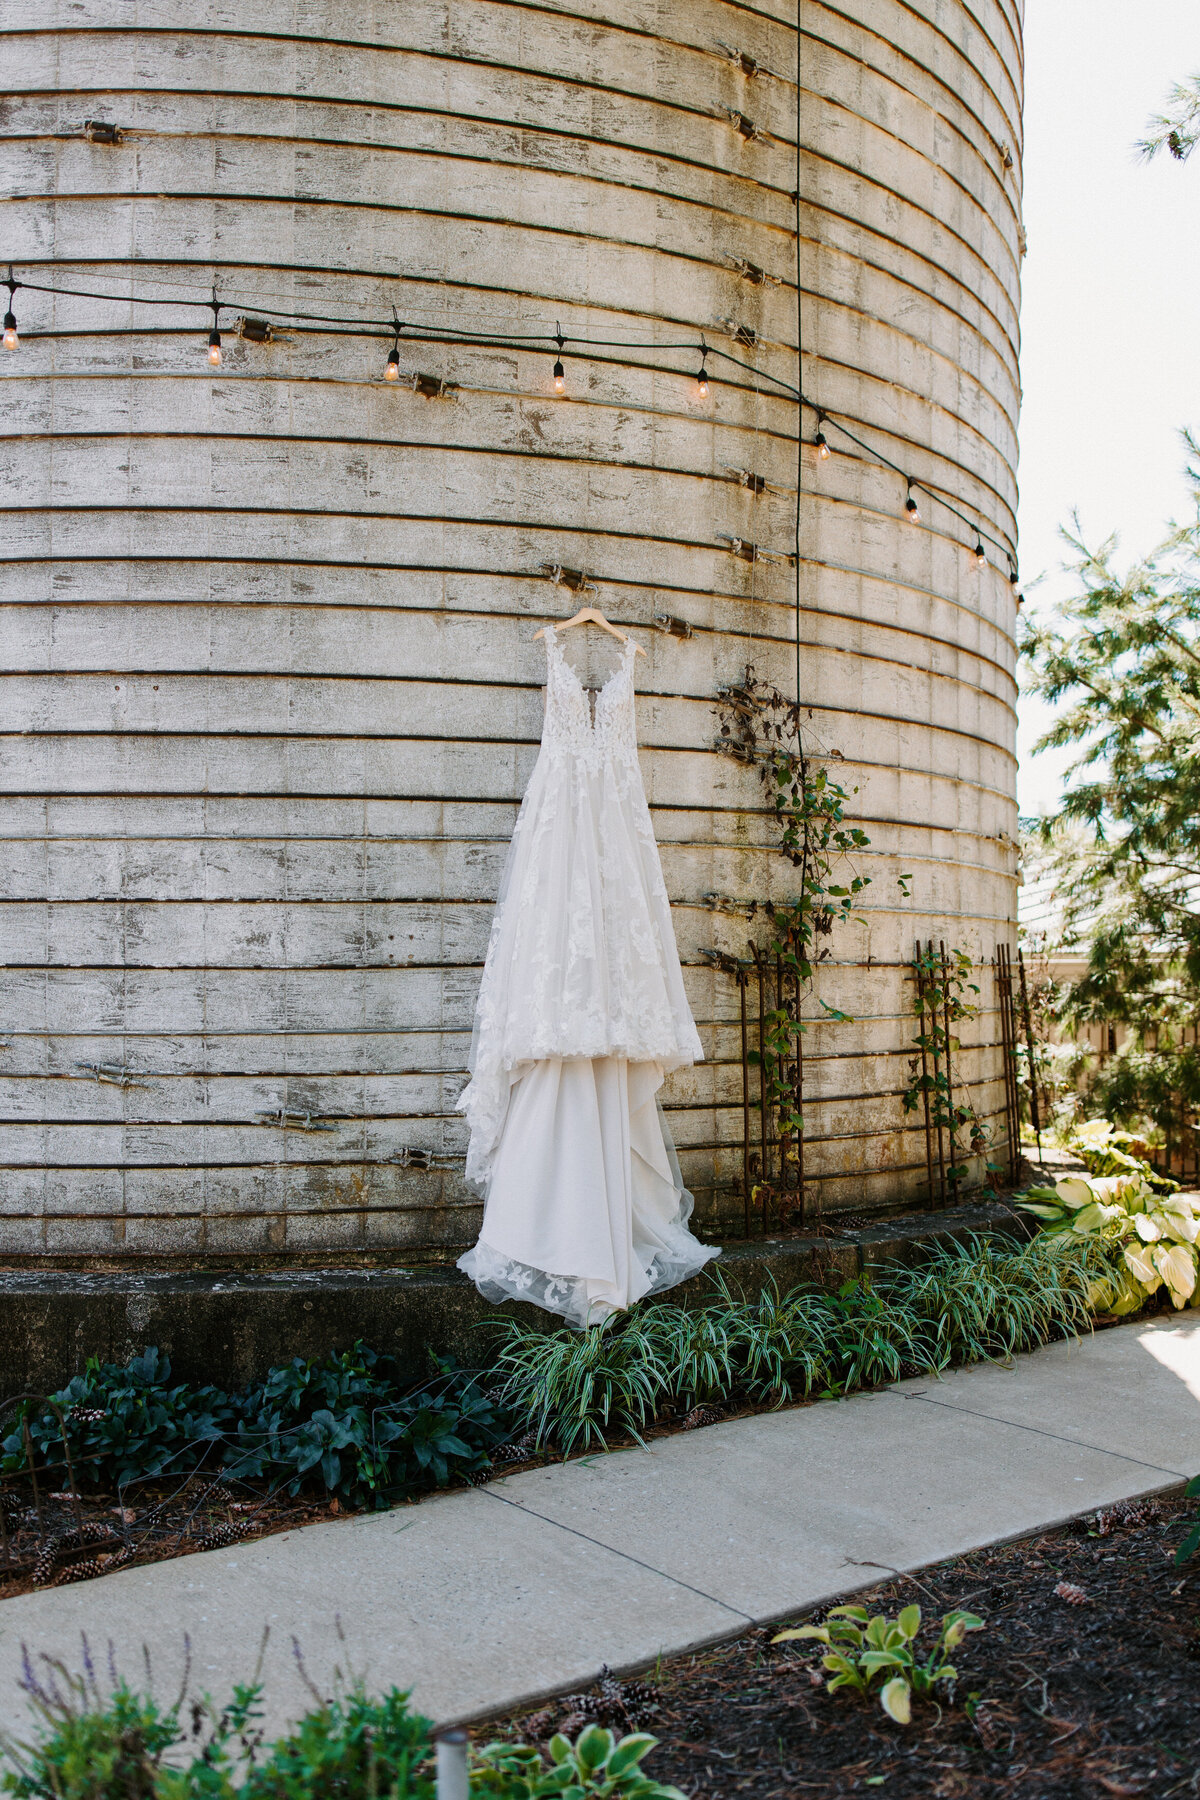 wedding dress hanging outside from a rustic building